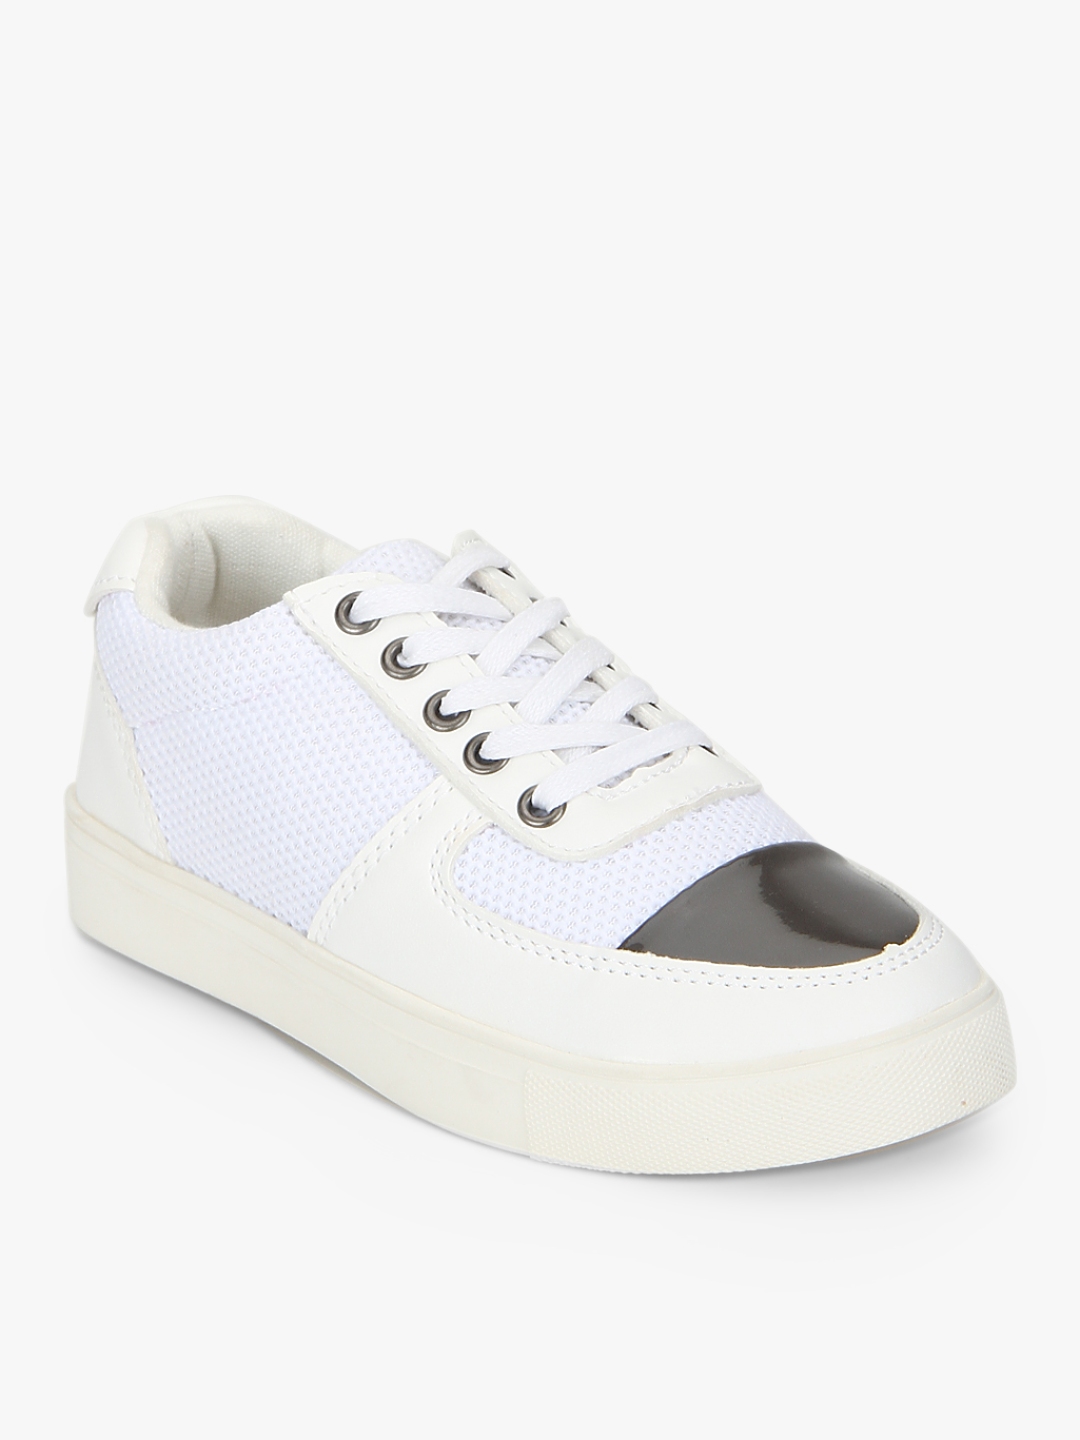 Buy White Sneakers - Casual Shoes for Boys 7933205 | Myntra